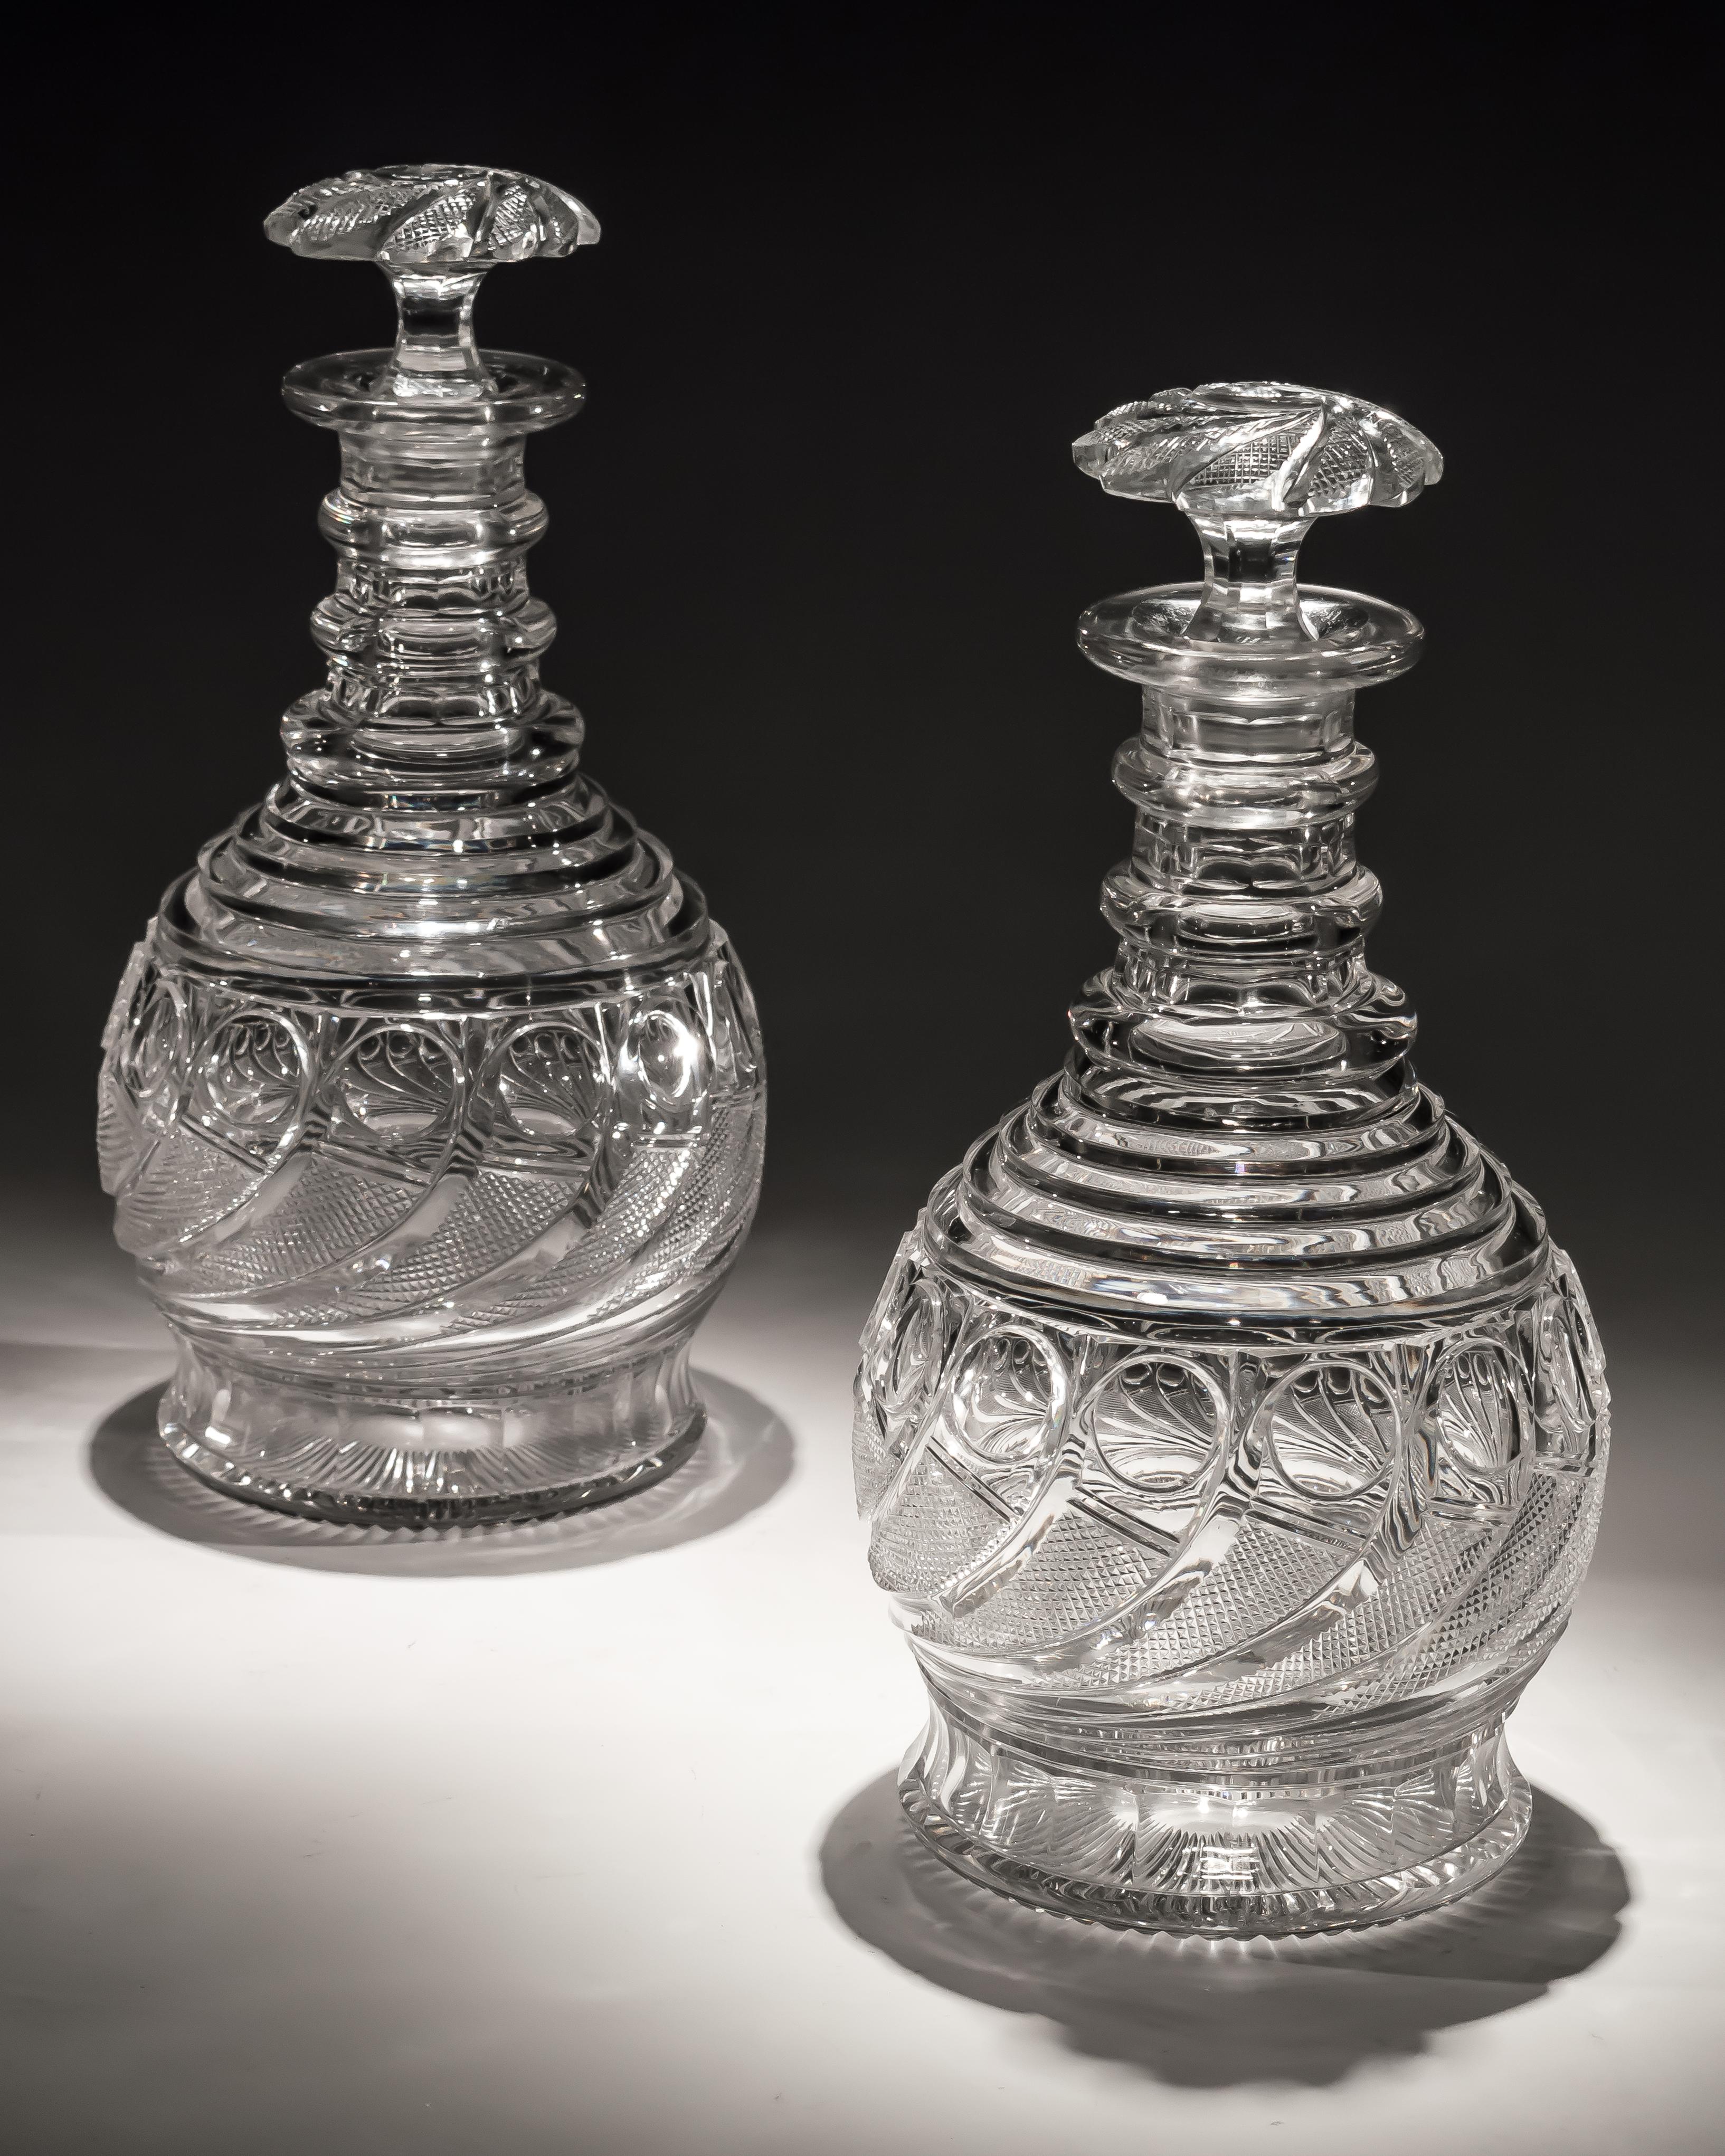 Exceptional Pair of Swirl Cut Regency Decanters with Swirl Cut Stoppers In Good Condition For Sale In Steyning, West sussex